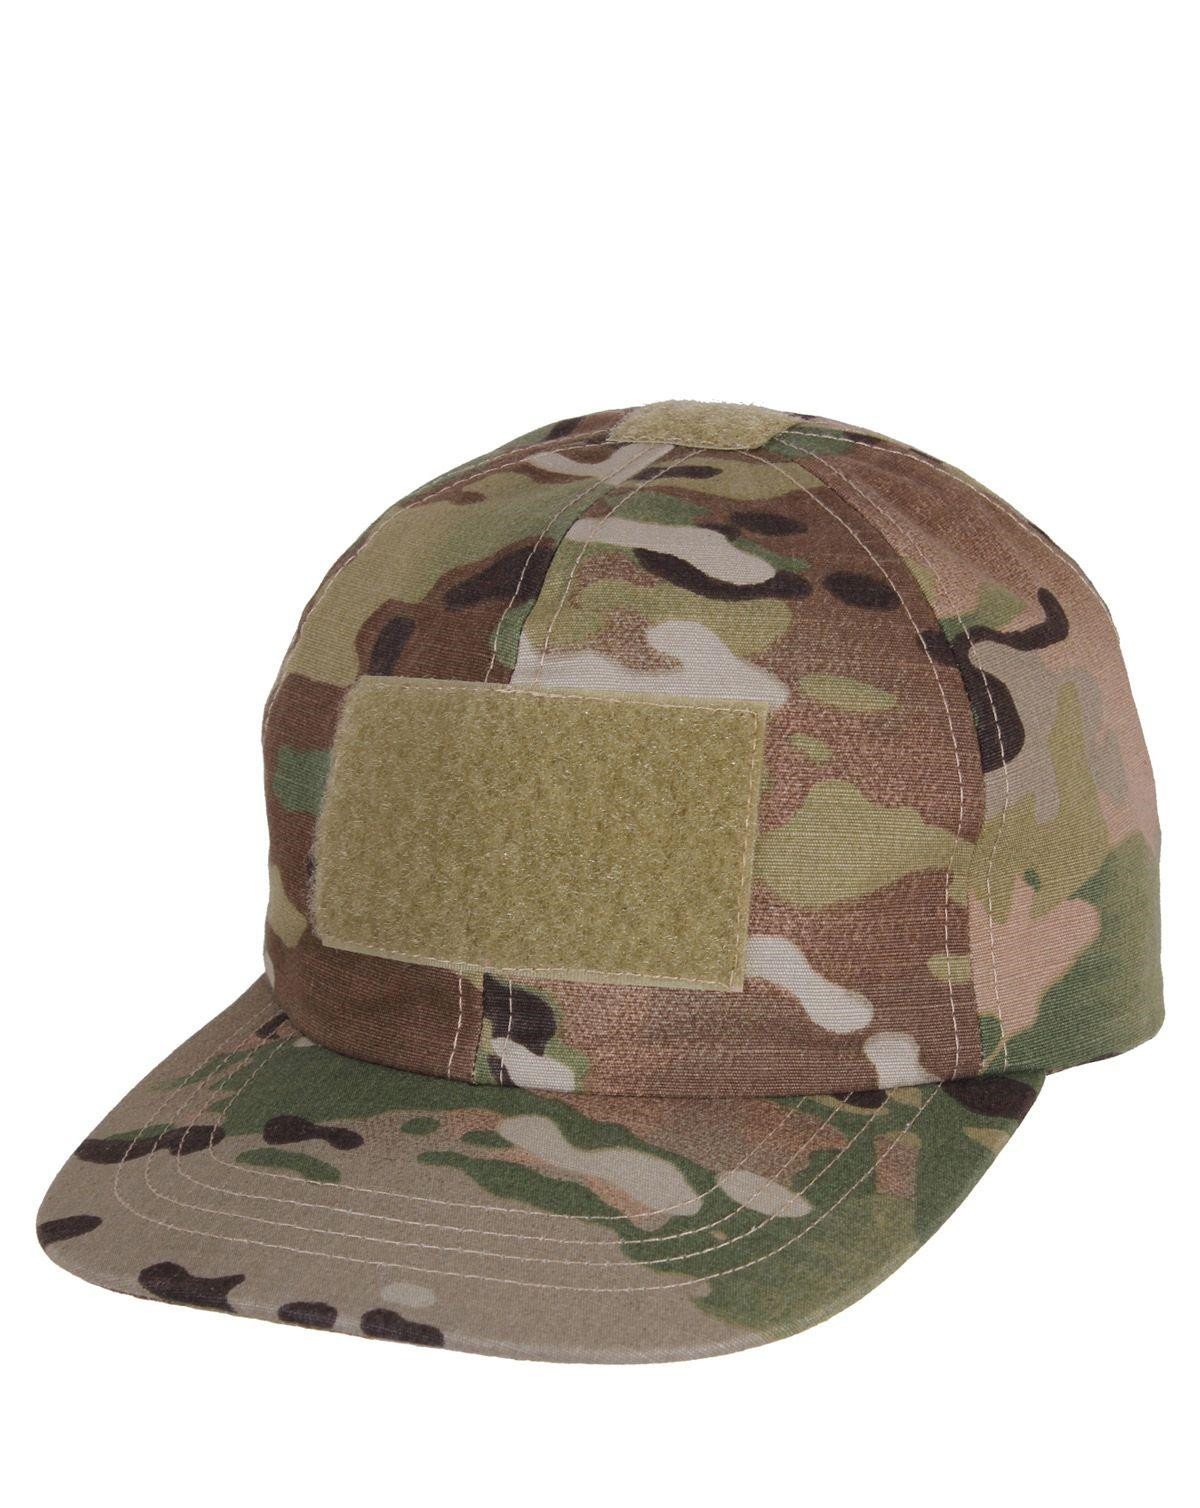 10: Rothco Operator Tactical Cap (Multicam, One Size)